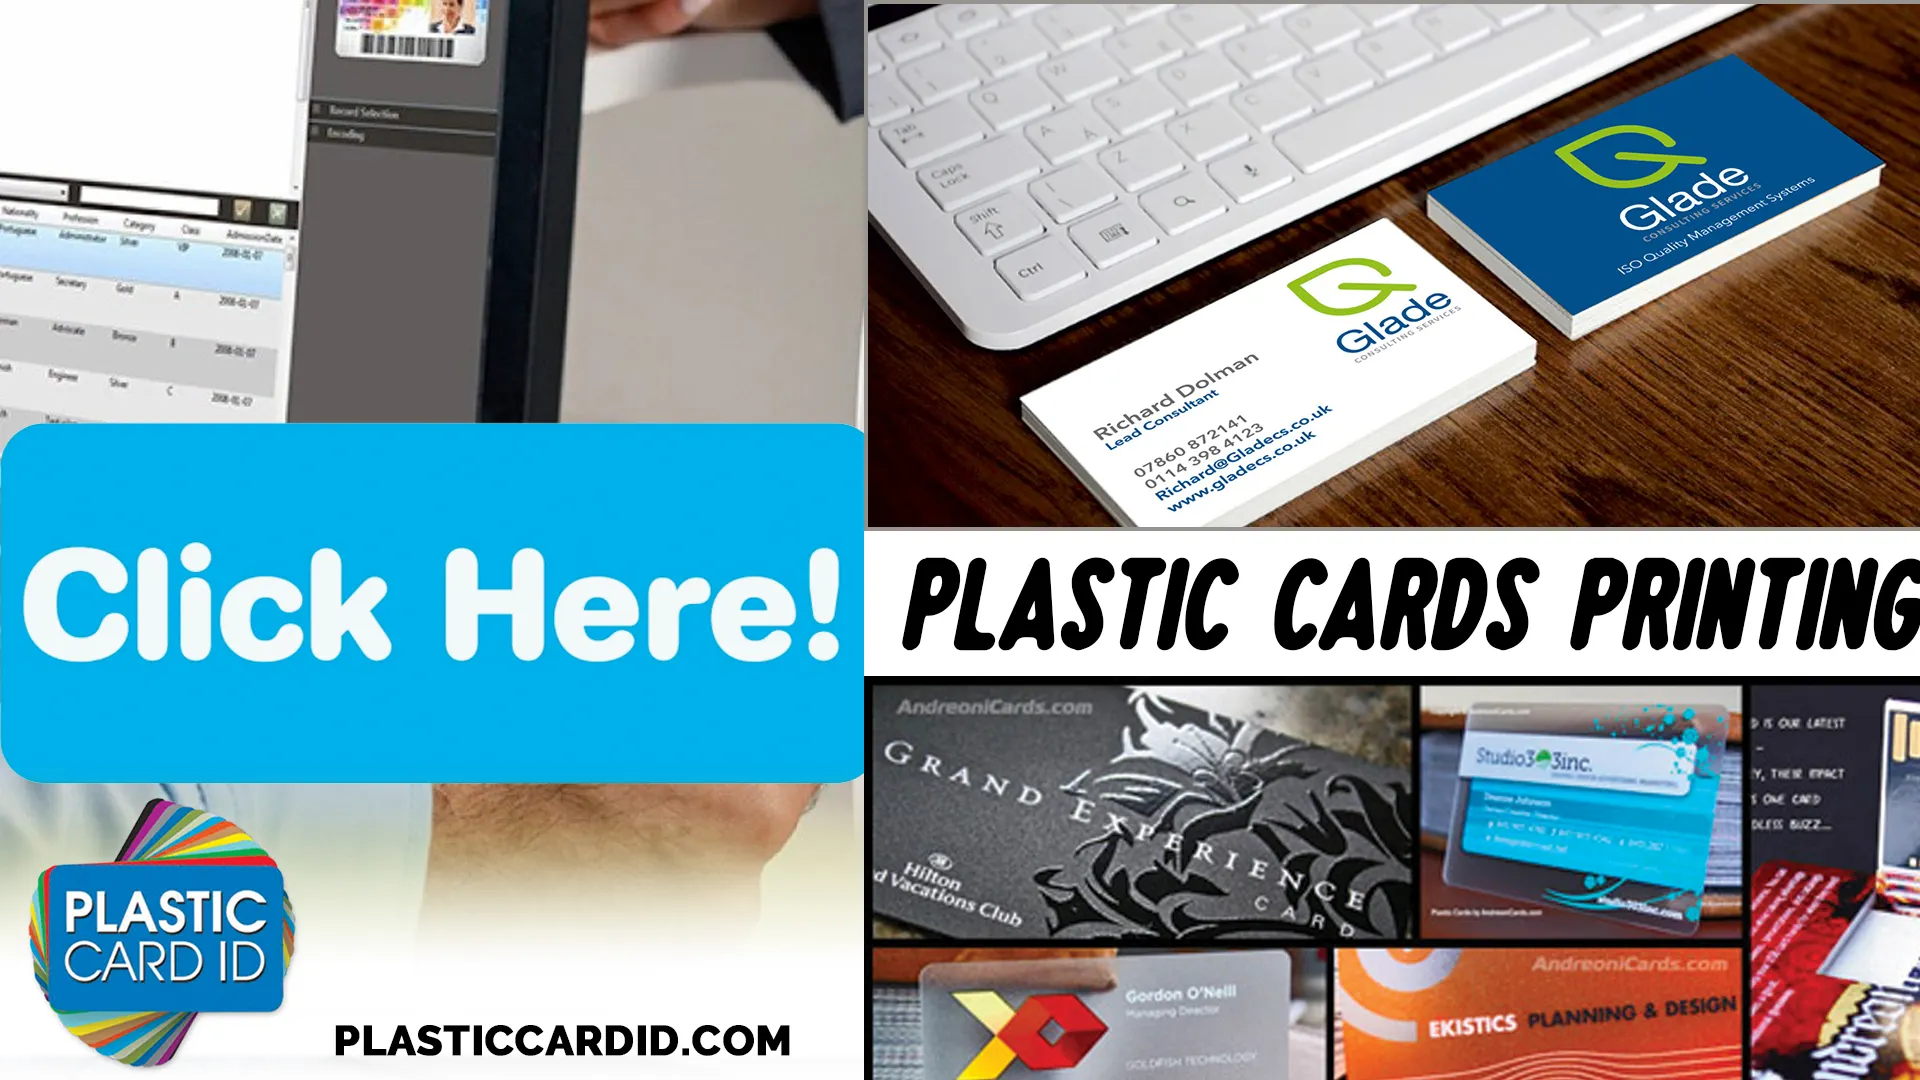 Welcome to the World of Innovative Branding with Plastic Cards